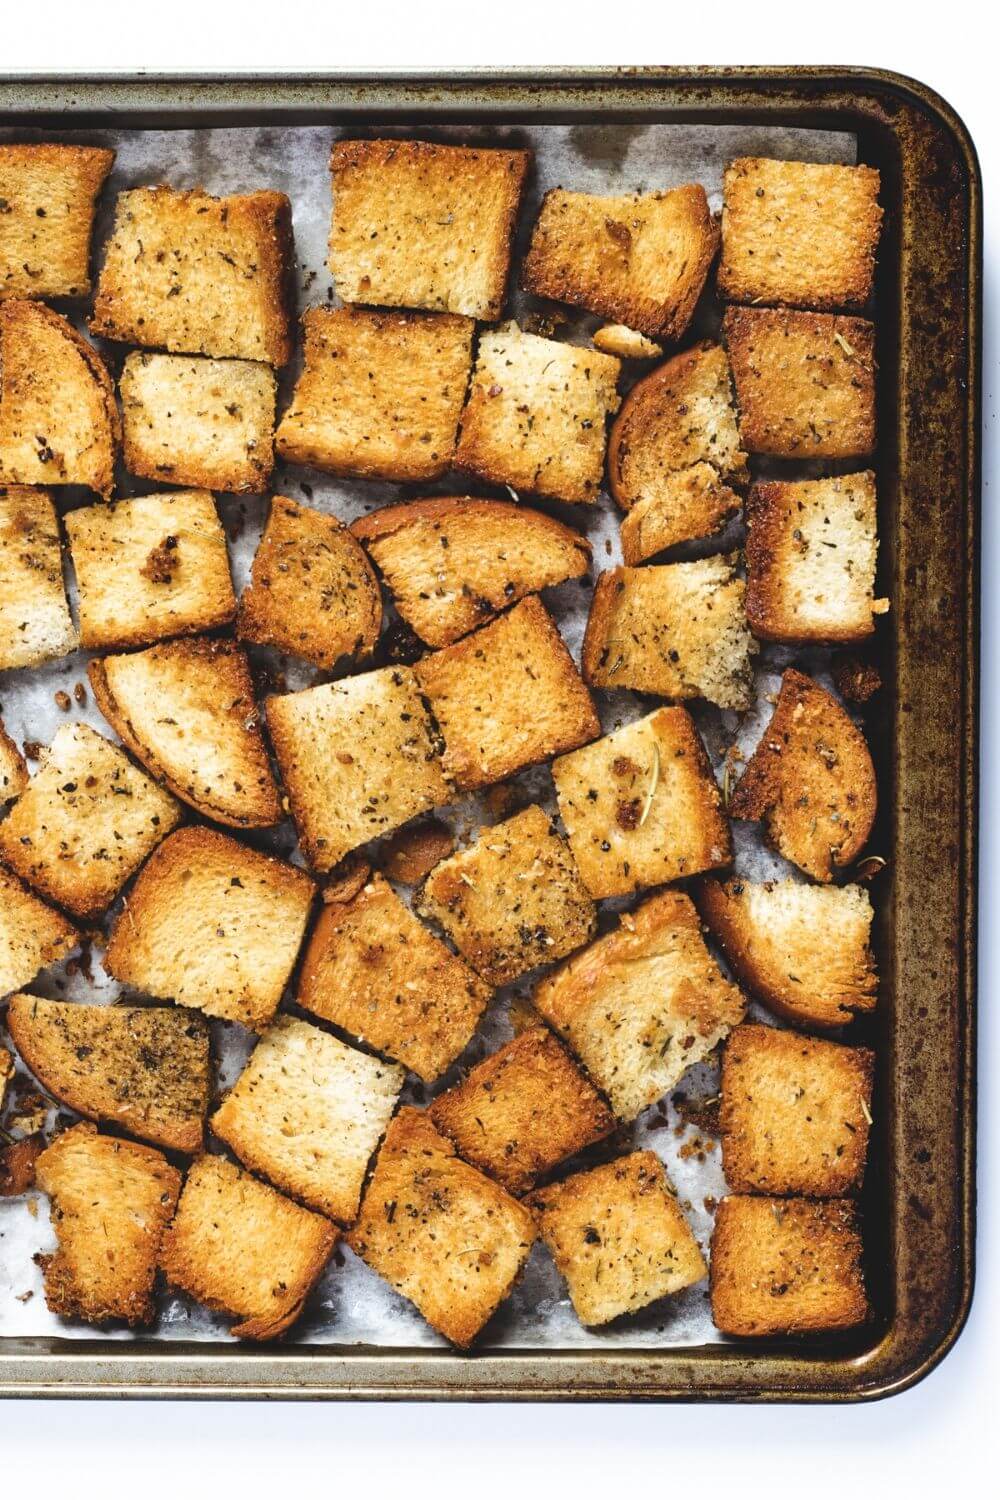 how to make homemade croutons recipe using stale bread